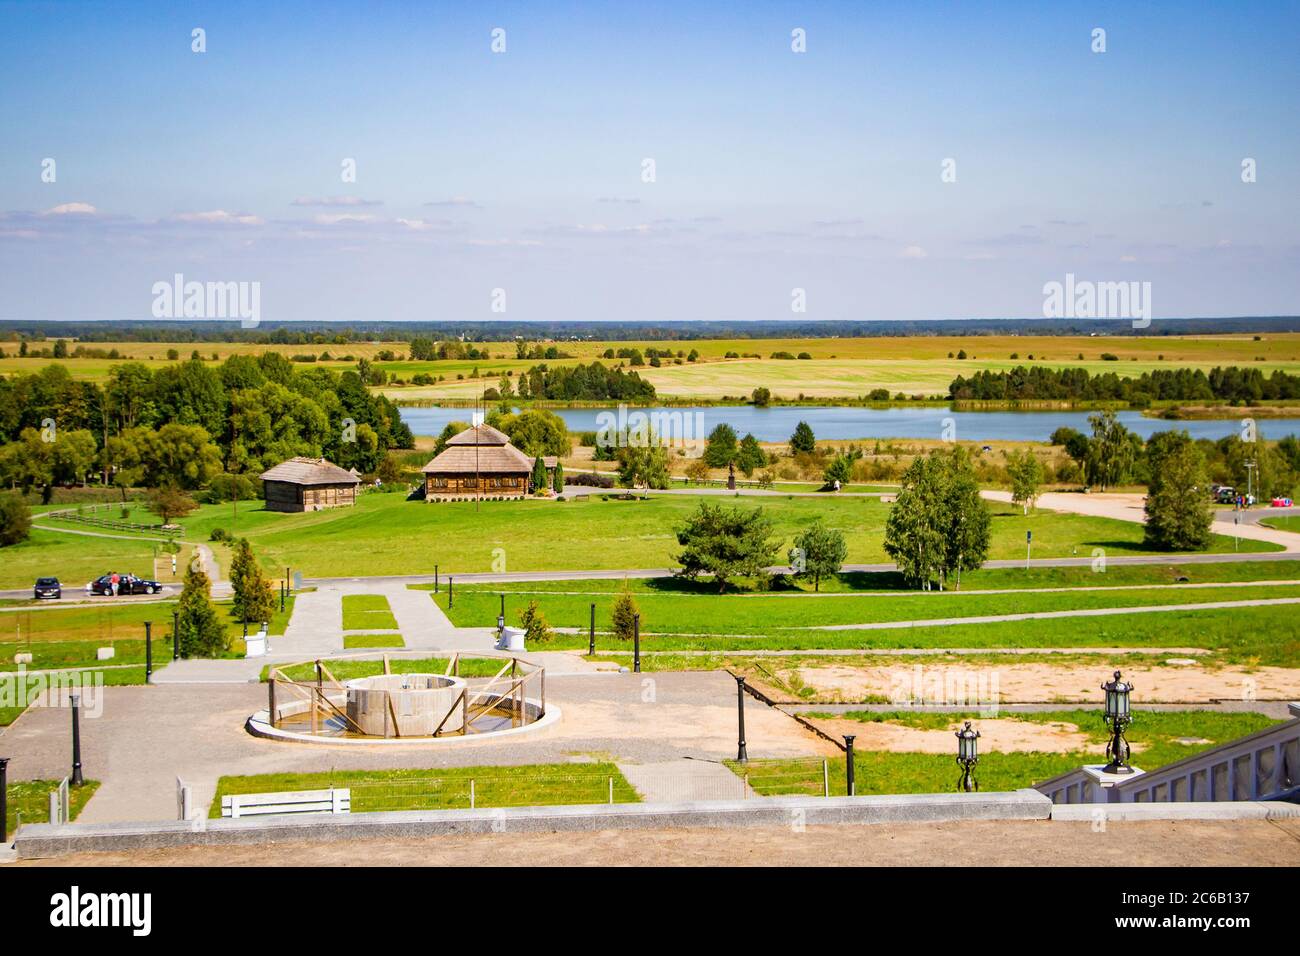 A beautiful place for walking. Park with walking paths on the lake. Summer sunny landscape. Stock Photo